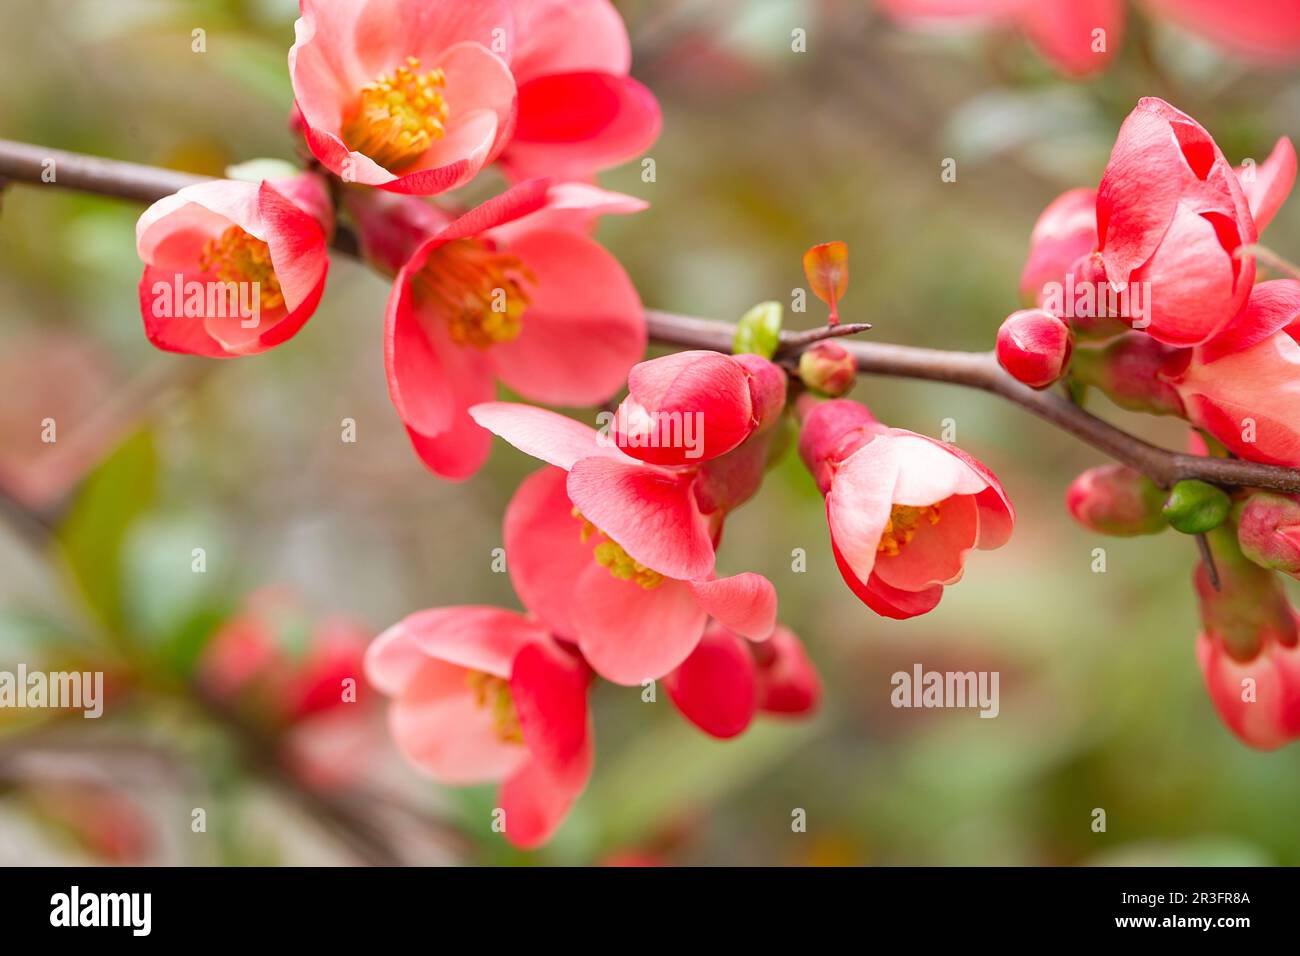 Macro of bright red spring flowering Japanese quince or Chaenomeles japonica on the blurred garden background. Stock Photo